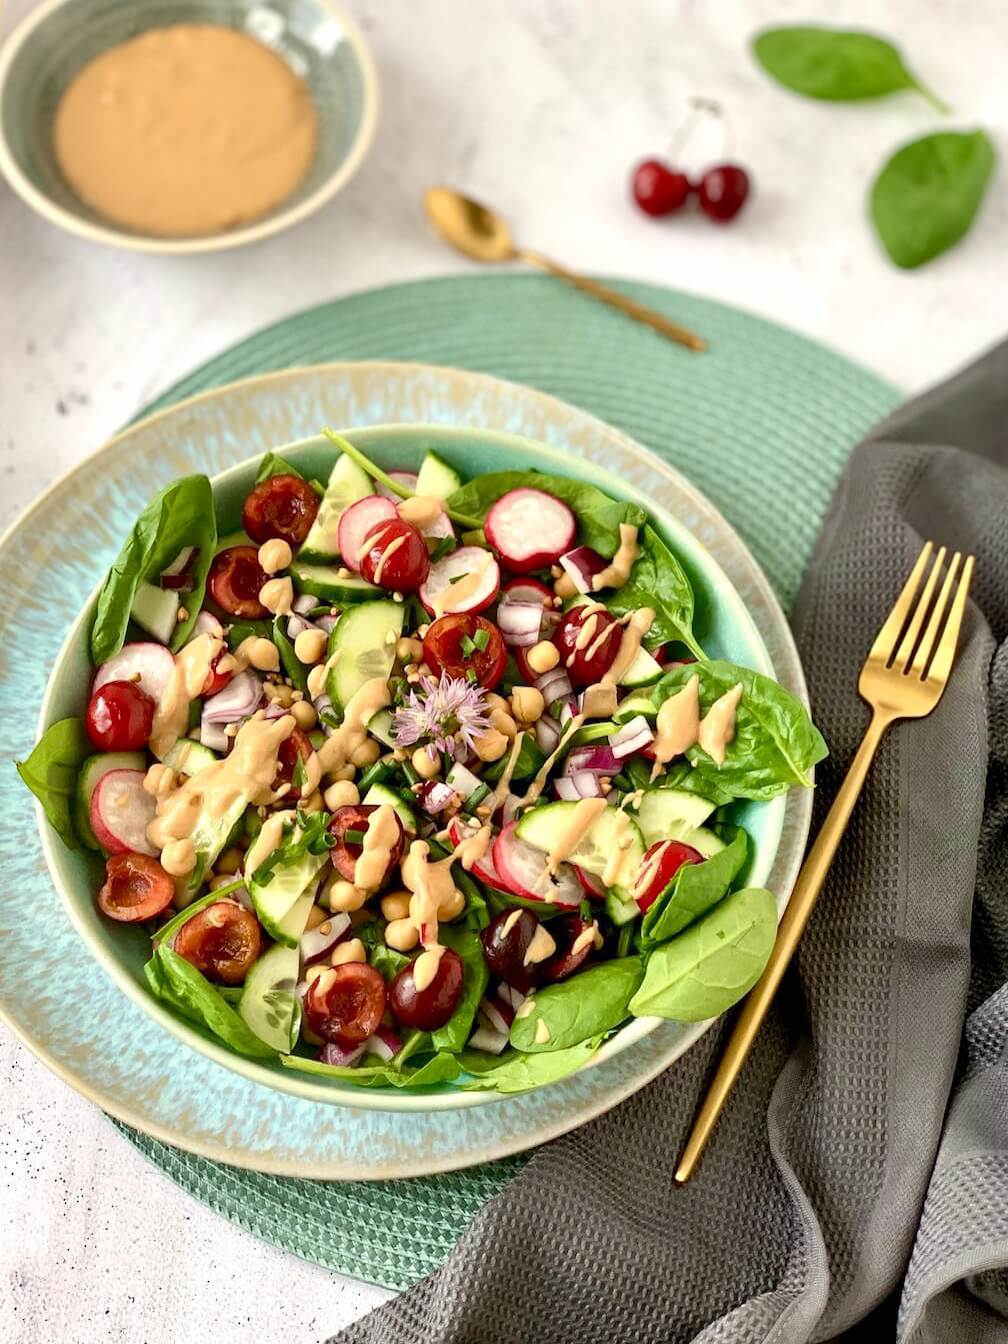 Green Leafy Salad with Cherries 1